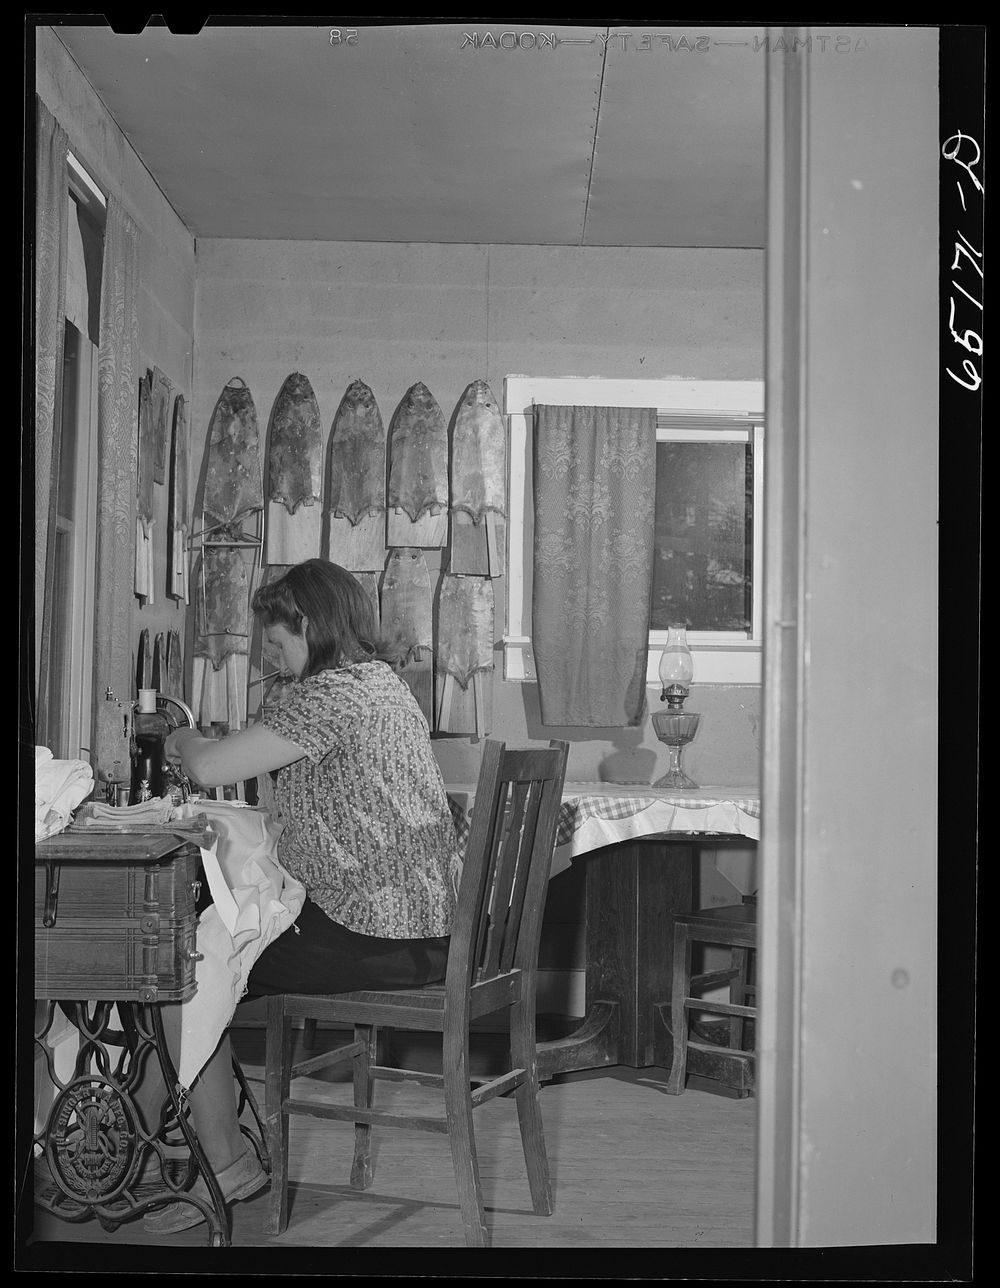 Flathead Valley special area project, Montana. Mrs. Lawrence Thompson sewing. The muskrat skins on the wall were trapped by…